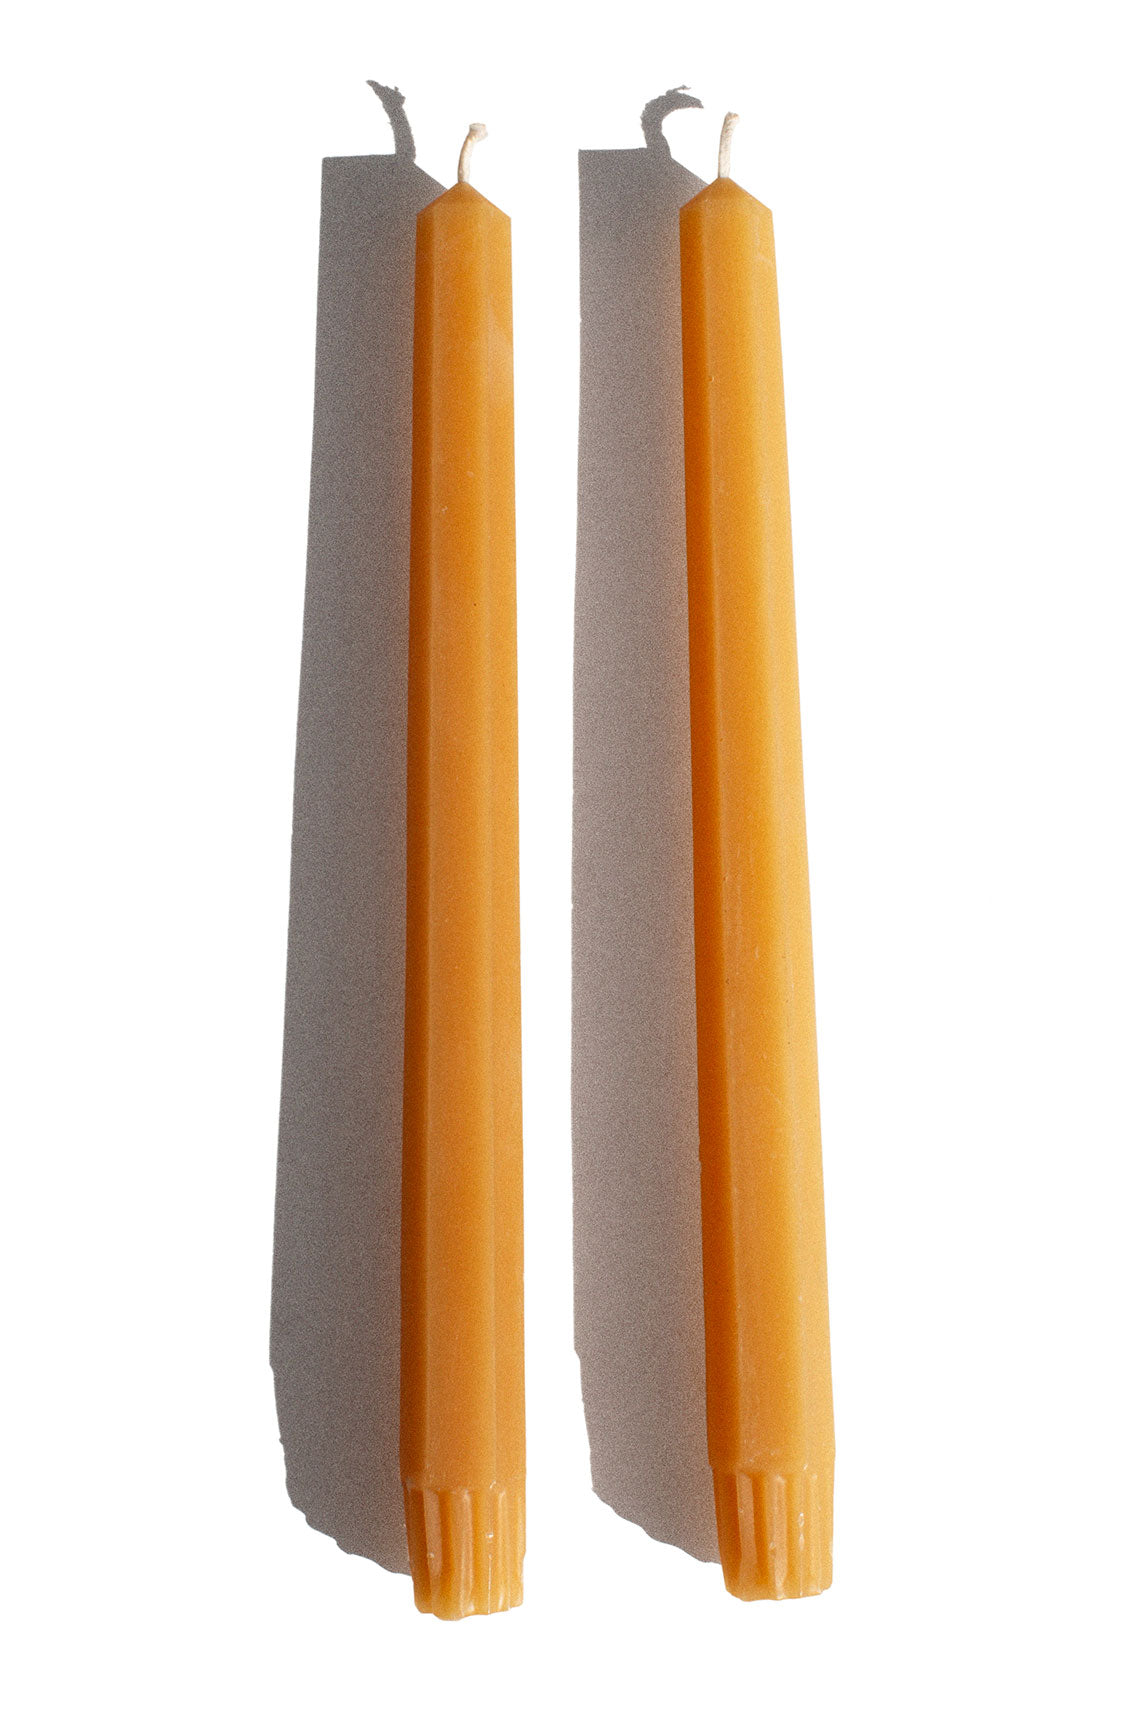 Beeswax 10" Hex Taper Candles